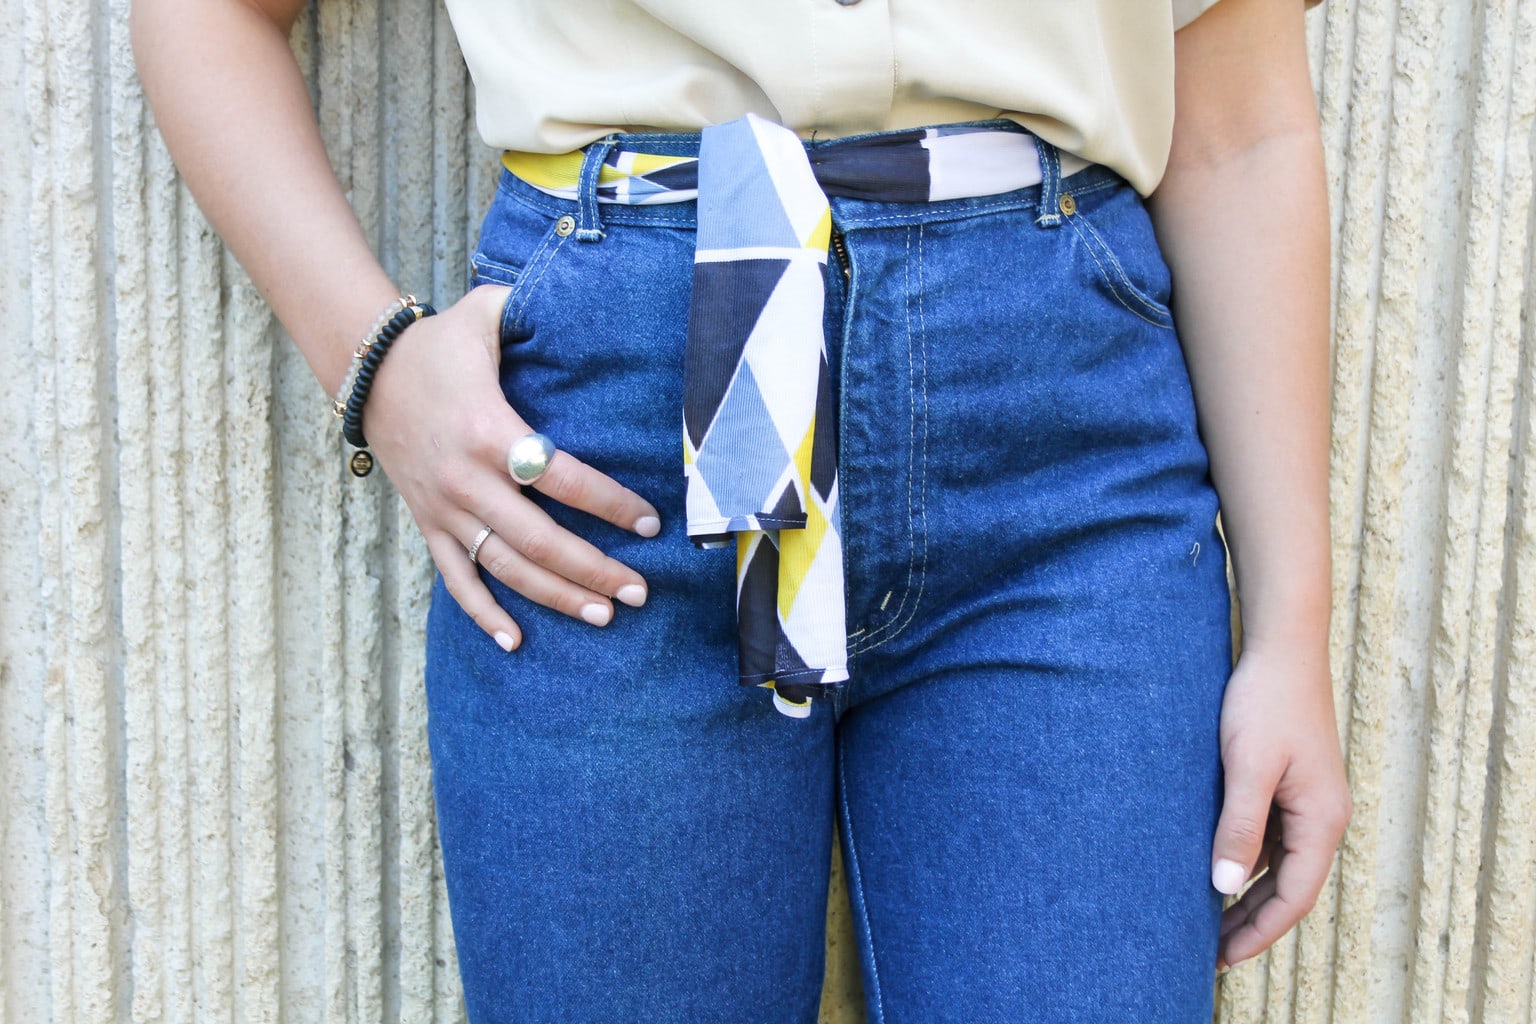 This patterned yellow, light blue, white, and dark blue scarf is tied as a belt around Emilee's high-waisted jeans.